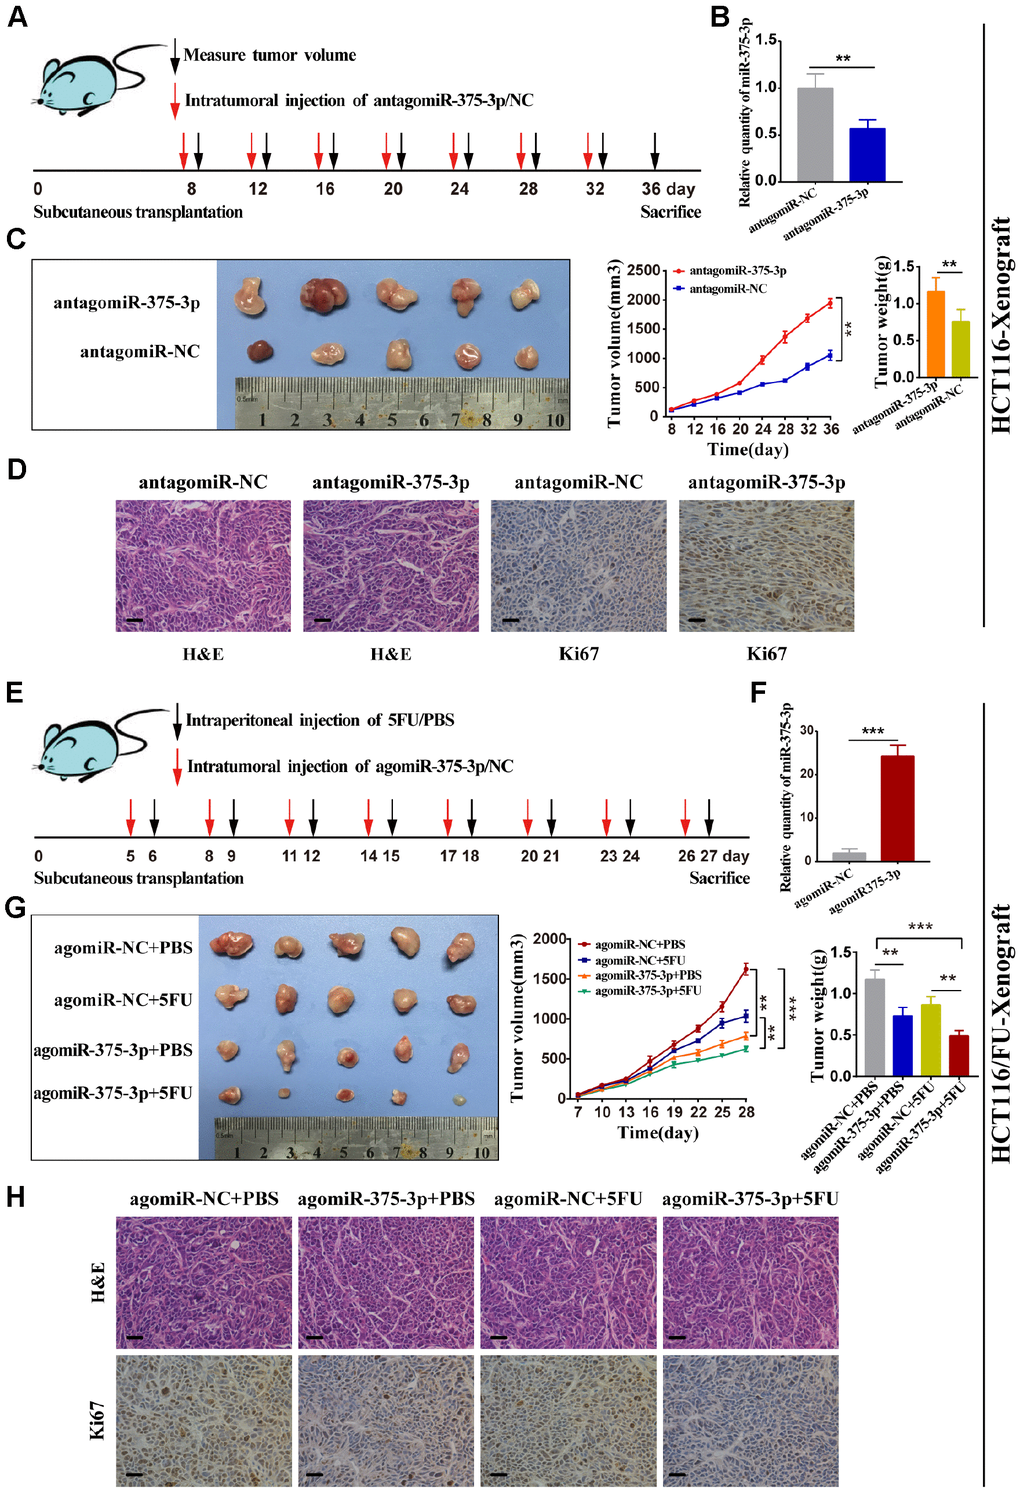 miR-375-3p suppresses tumorigenesis and reverses chemoresistance with 5FU of CRC in vivo. (A) Schematic outline of the treatment of HCT116 cells transfected with antagomiR-375-3p/NC in a subcutaneous tumor model followed by intratumoral injection of antagomiR-375-3p/NC. (B) qRT-PCR analysis of miR-375-3p expression in mice xenograft of antagomiR-375-3p/NC groups. (C) Representative images of transplanted tumors removed from mice after sacrifice at the 36th day, tumor volume and tumor weight were measured. (D) Representative images of hematoxylin and eosin (H&E) staining and Ki67 immunostaining of tumor lumps from two groups. Scale bar=50μm. (E) Schematic outline of the treatment of HCT116/FU cells transfected with agomiR-375-3p/NC in a subcutaneous tumor model followed by intratumoral injection of agomiR-375-3p/NC or PBS/5FU. (F) qRT-PCR analysis of miR-375-3p expression in mice xenograft of agomiR-375-3p/NC groups. (G) Representative images of transplanted tumors removed from mice after sacrifice at the 27th day, tumor volume and tumor weight were measured. (H) Representative images of hematoxylin and eosin (H&E) staining and Ki67 immunostaining of tumor lumps from 4 different groups. *P P P 